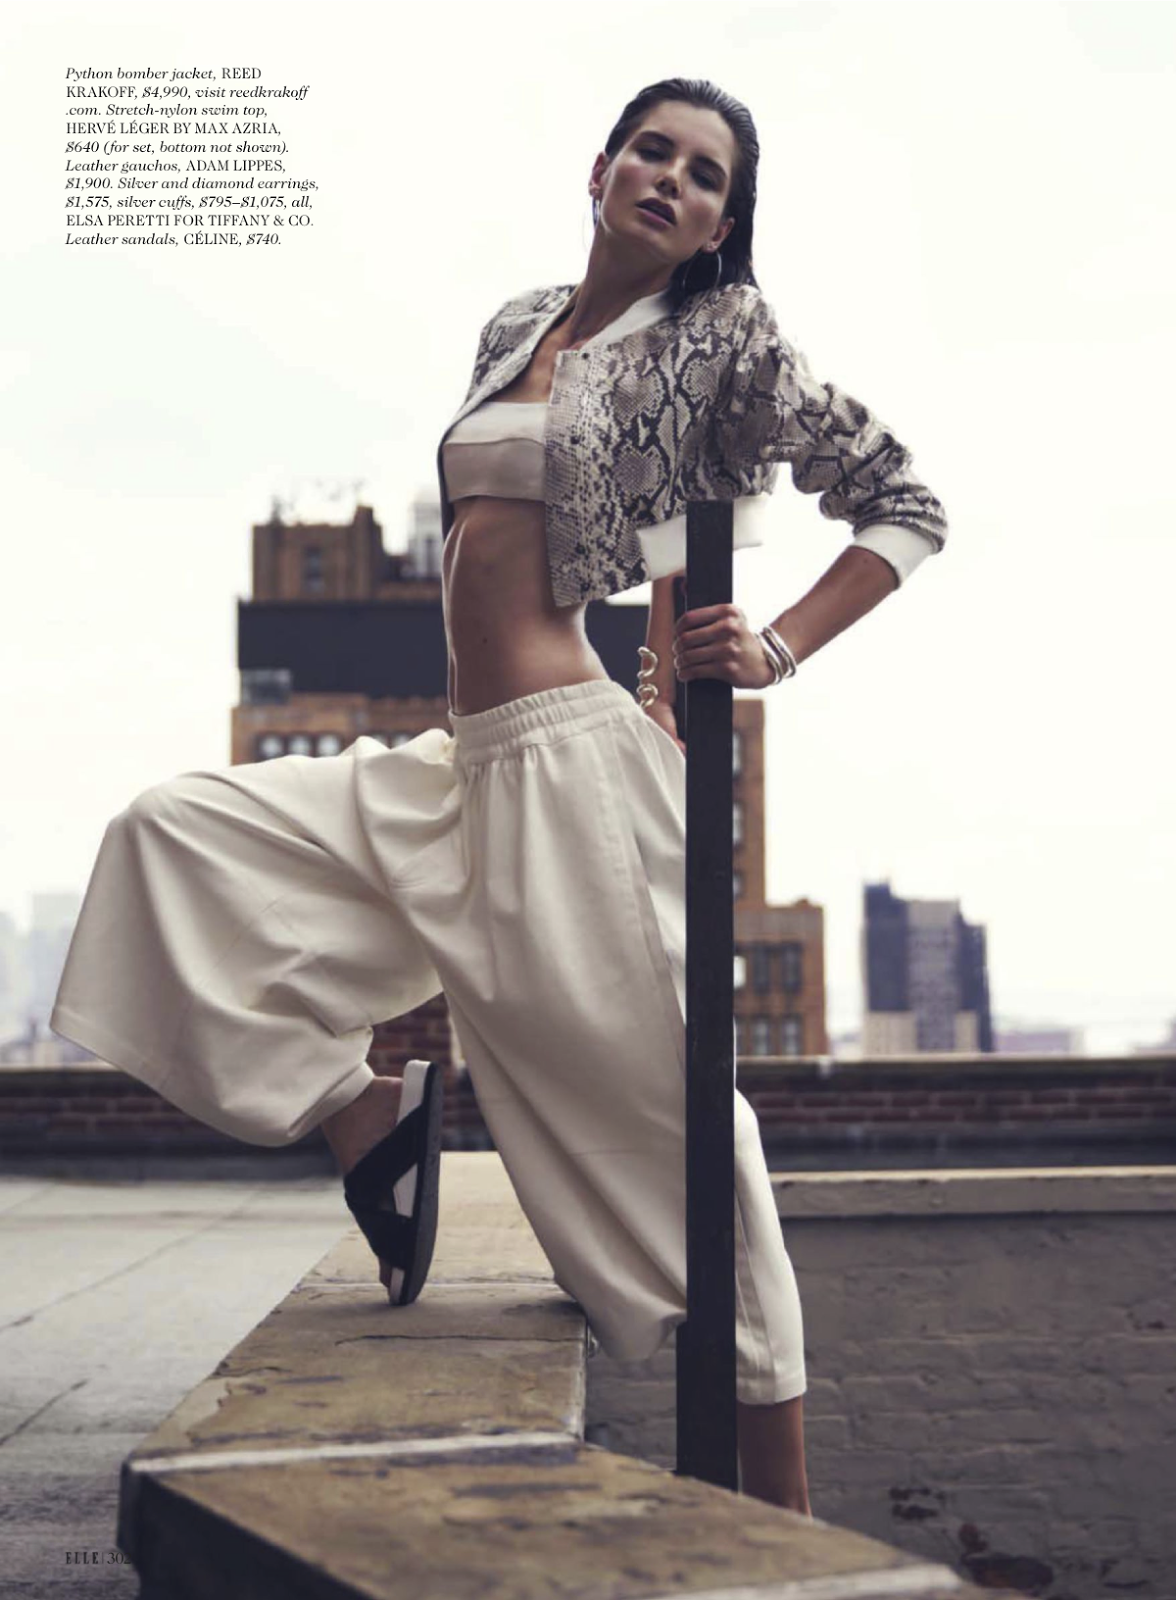 Elle_USA_2013-12+%2528dragged%2529+2.png